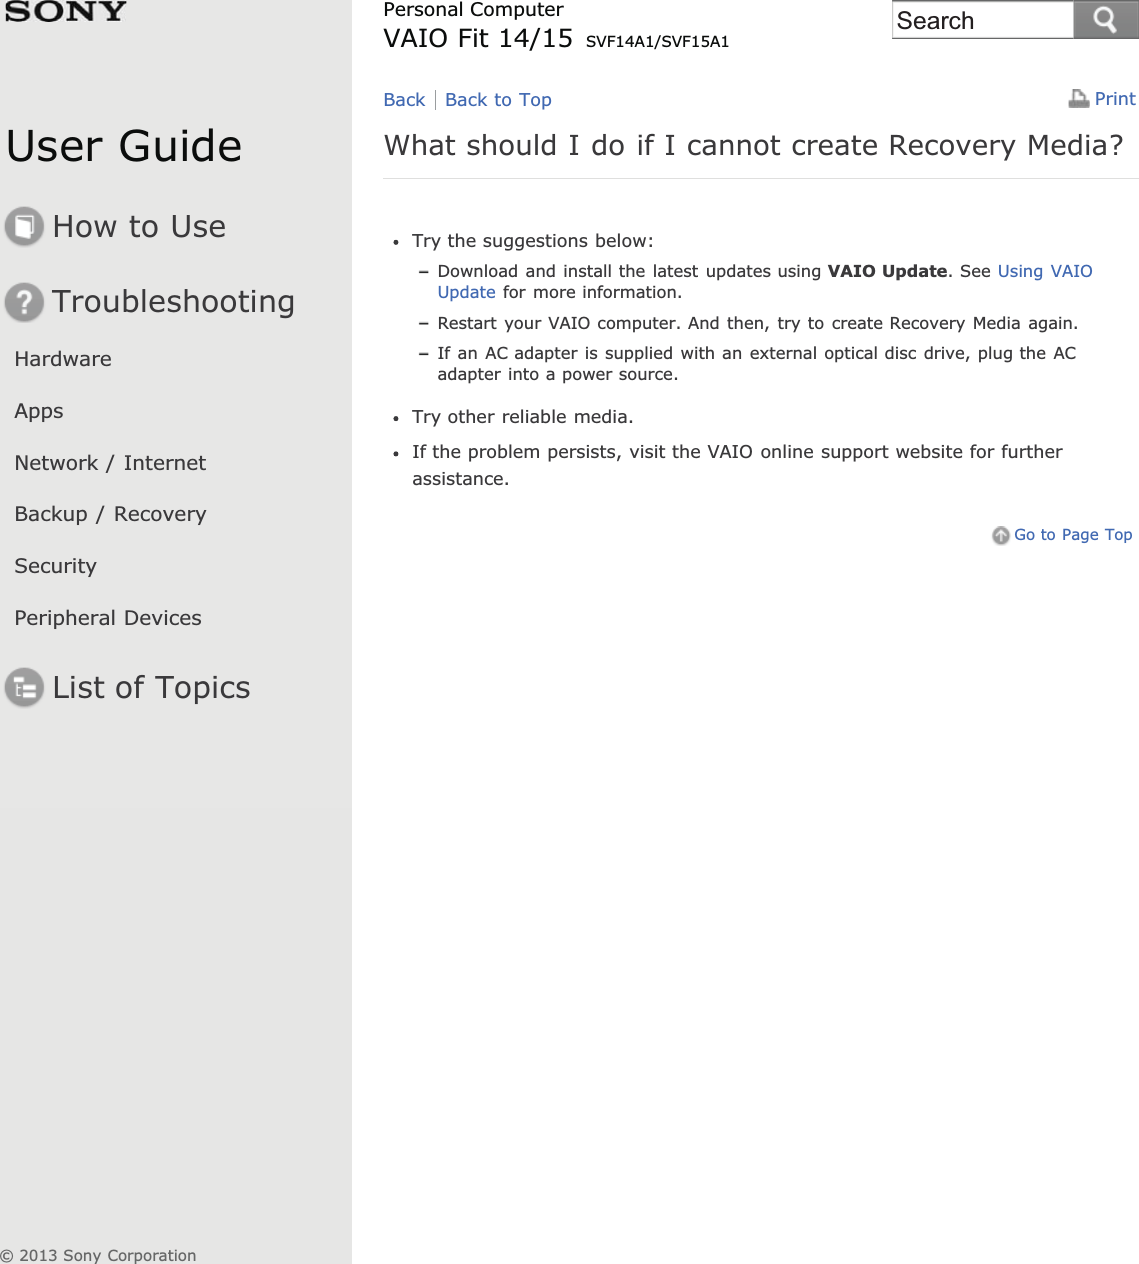 User GuideHow to UseTroubleshootingHardwareAppsNetwork / InternetBackup / RecoverySecurityPeripheral DevicesList of TopicsPrintPersonal ComputerVAIO Fit 14/15 SVF14A1/SVF15A1What should I do if I cannot create Recovery Media?Try the suggestions below:Download and install the latest updates using VAIO Update. See Using VAIOUpdate for more information.Restart your VAIO computer. And then, try to create Recovery Media again.If an AC adapter is supplied with an external optical disc drive, plug the ACadapter into a power source.Try other reliable media.If the problem persists, visit the VAIO online support website for furtherassistance.Go to Page TopBack Back to Top© 2013 Sony CorporationSearch